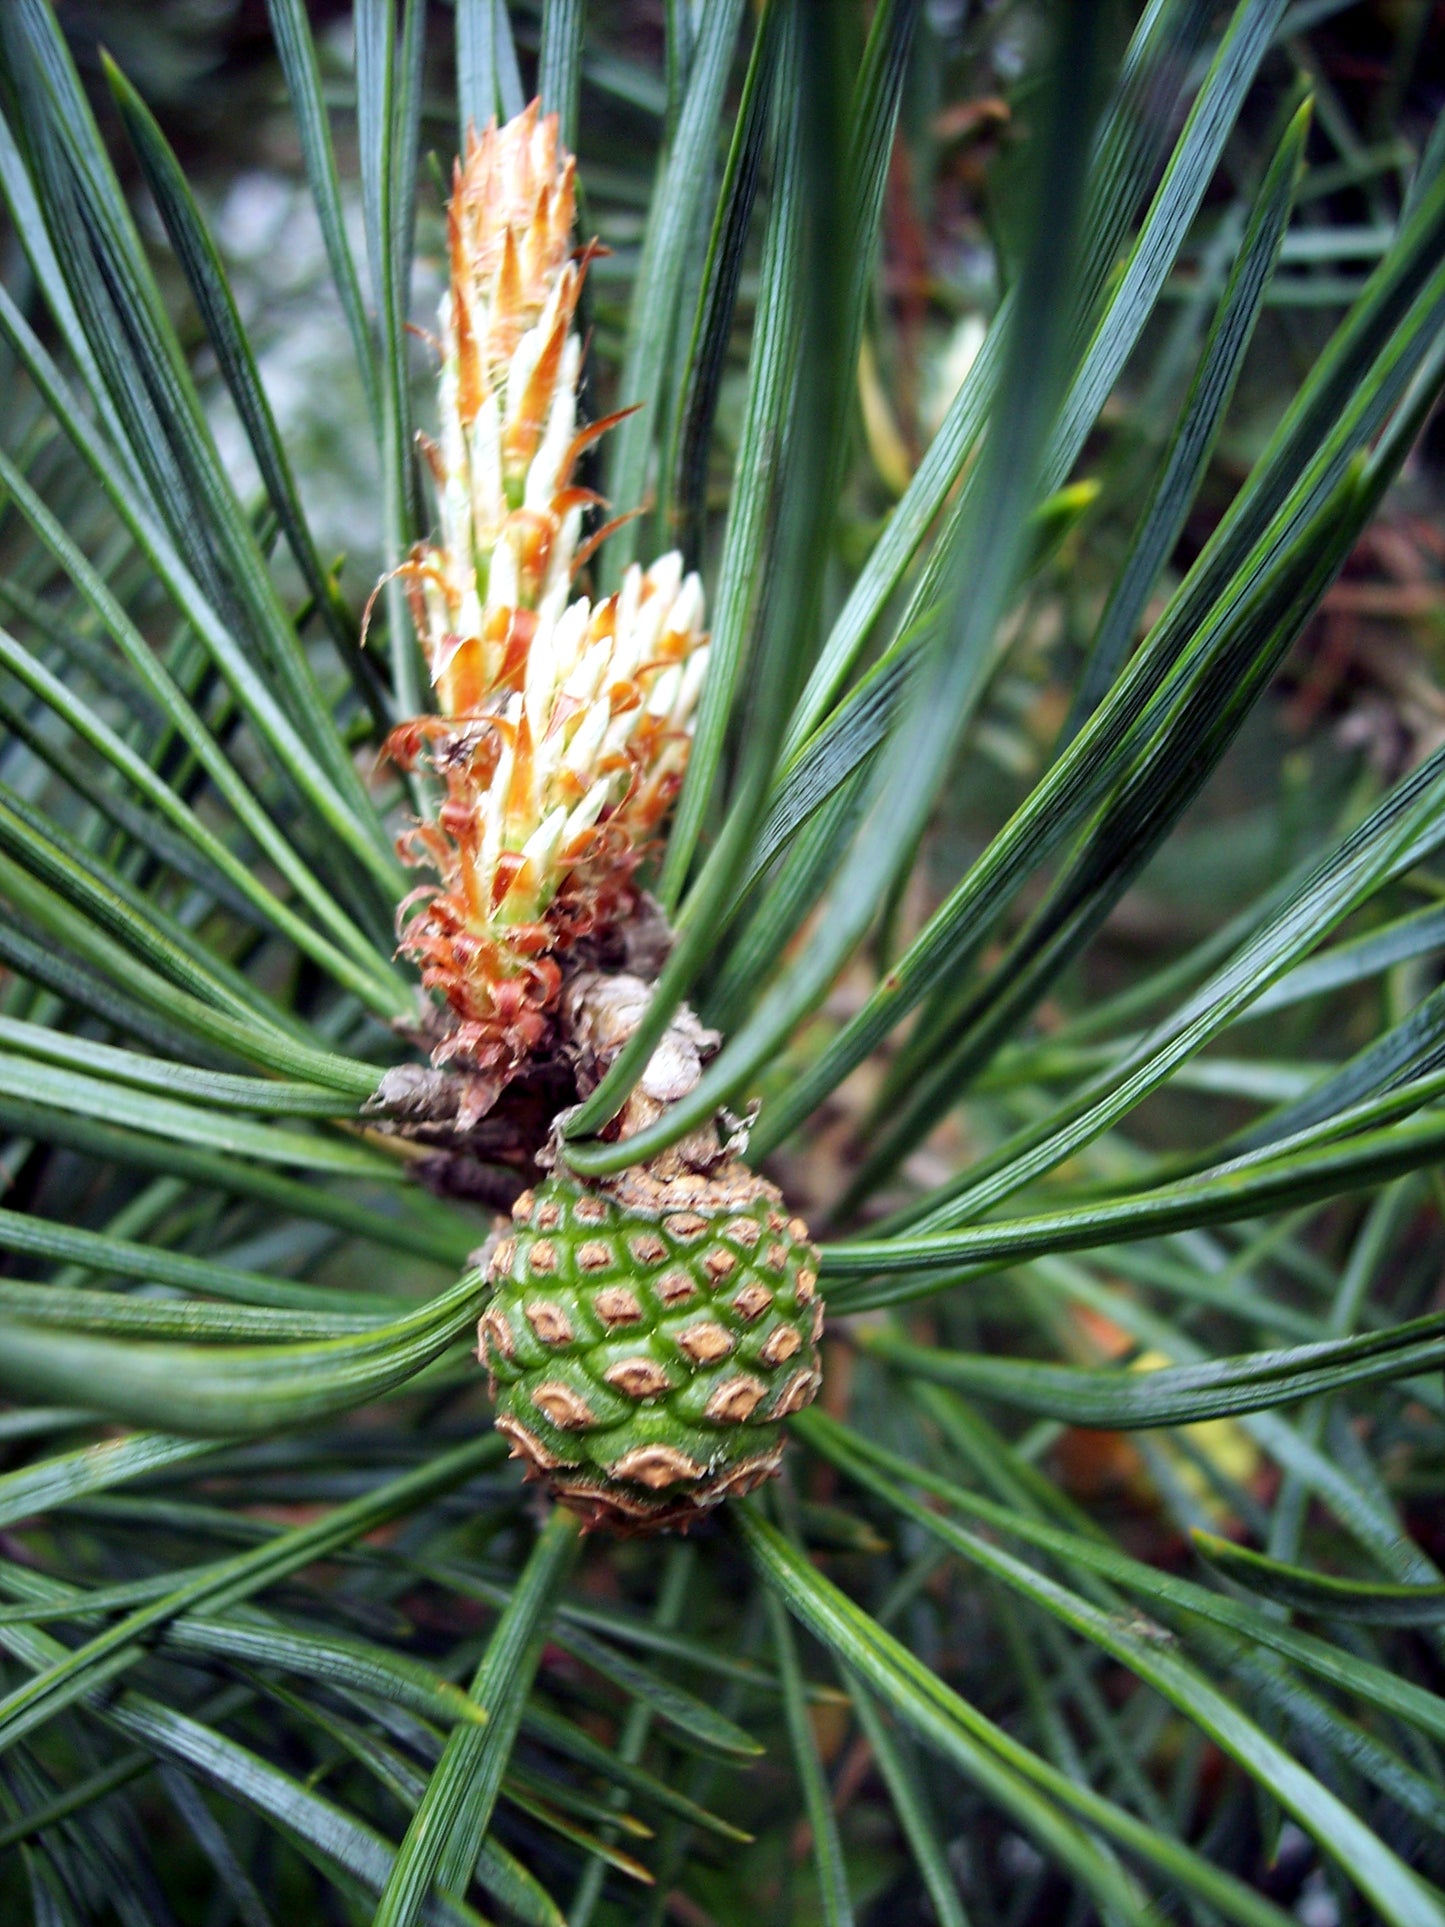 Pine plant with a half grown pine cone forming on it.